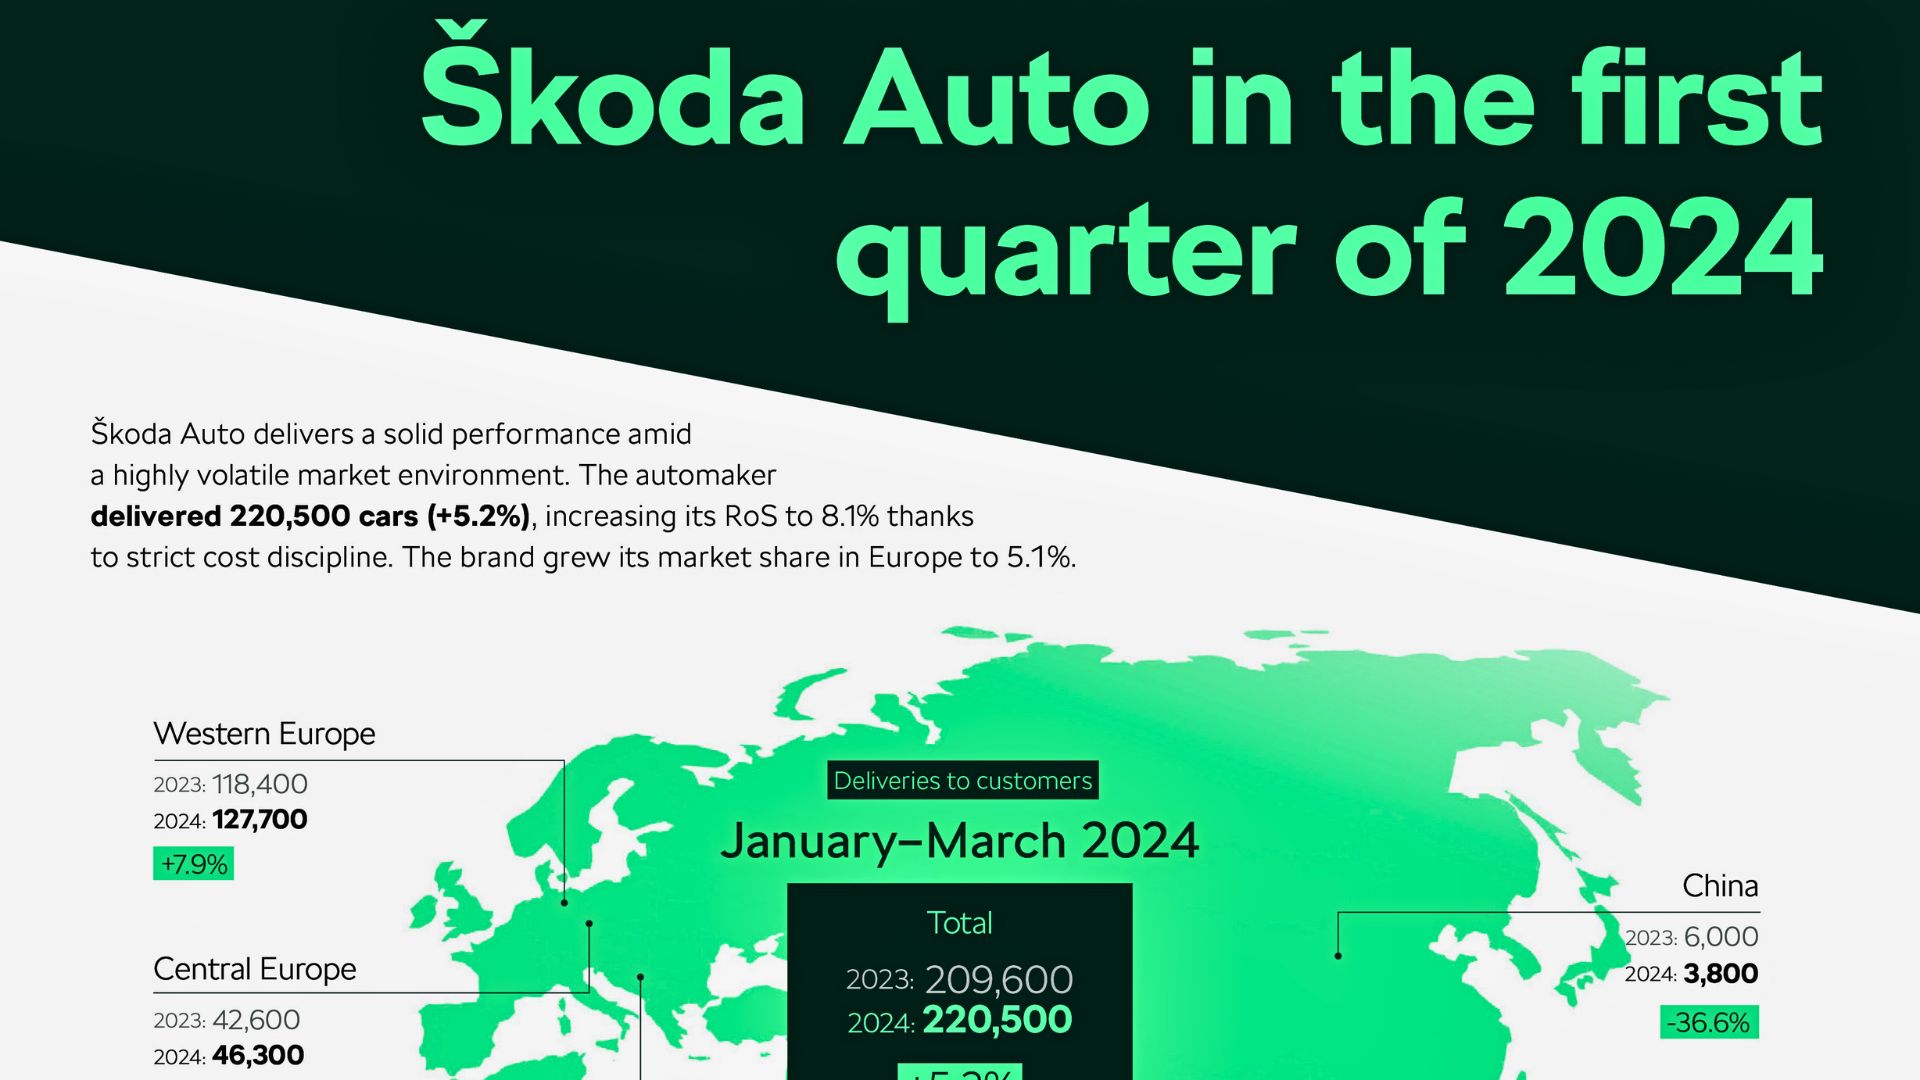 Skoda Auto's performance in Q1 2024 reflects both successes and areas for improvement